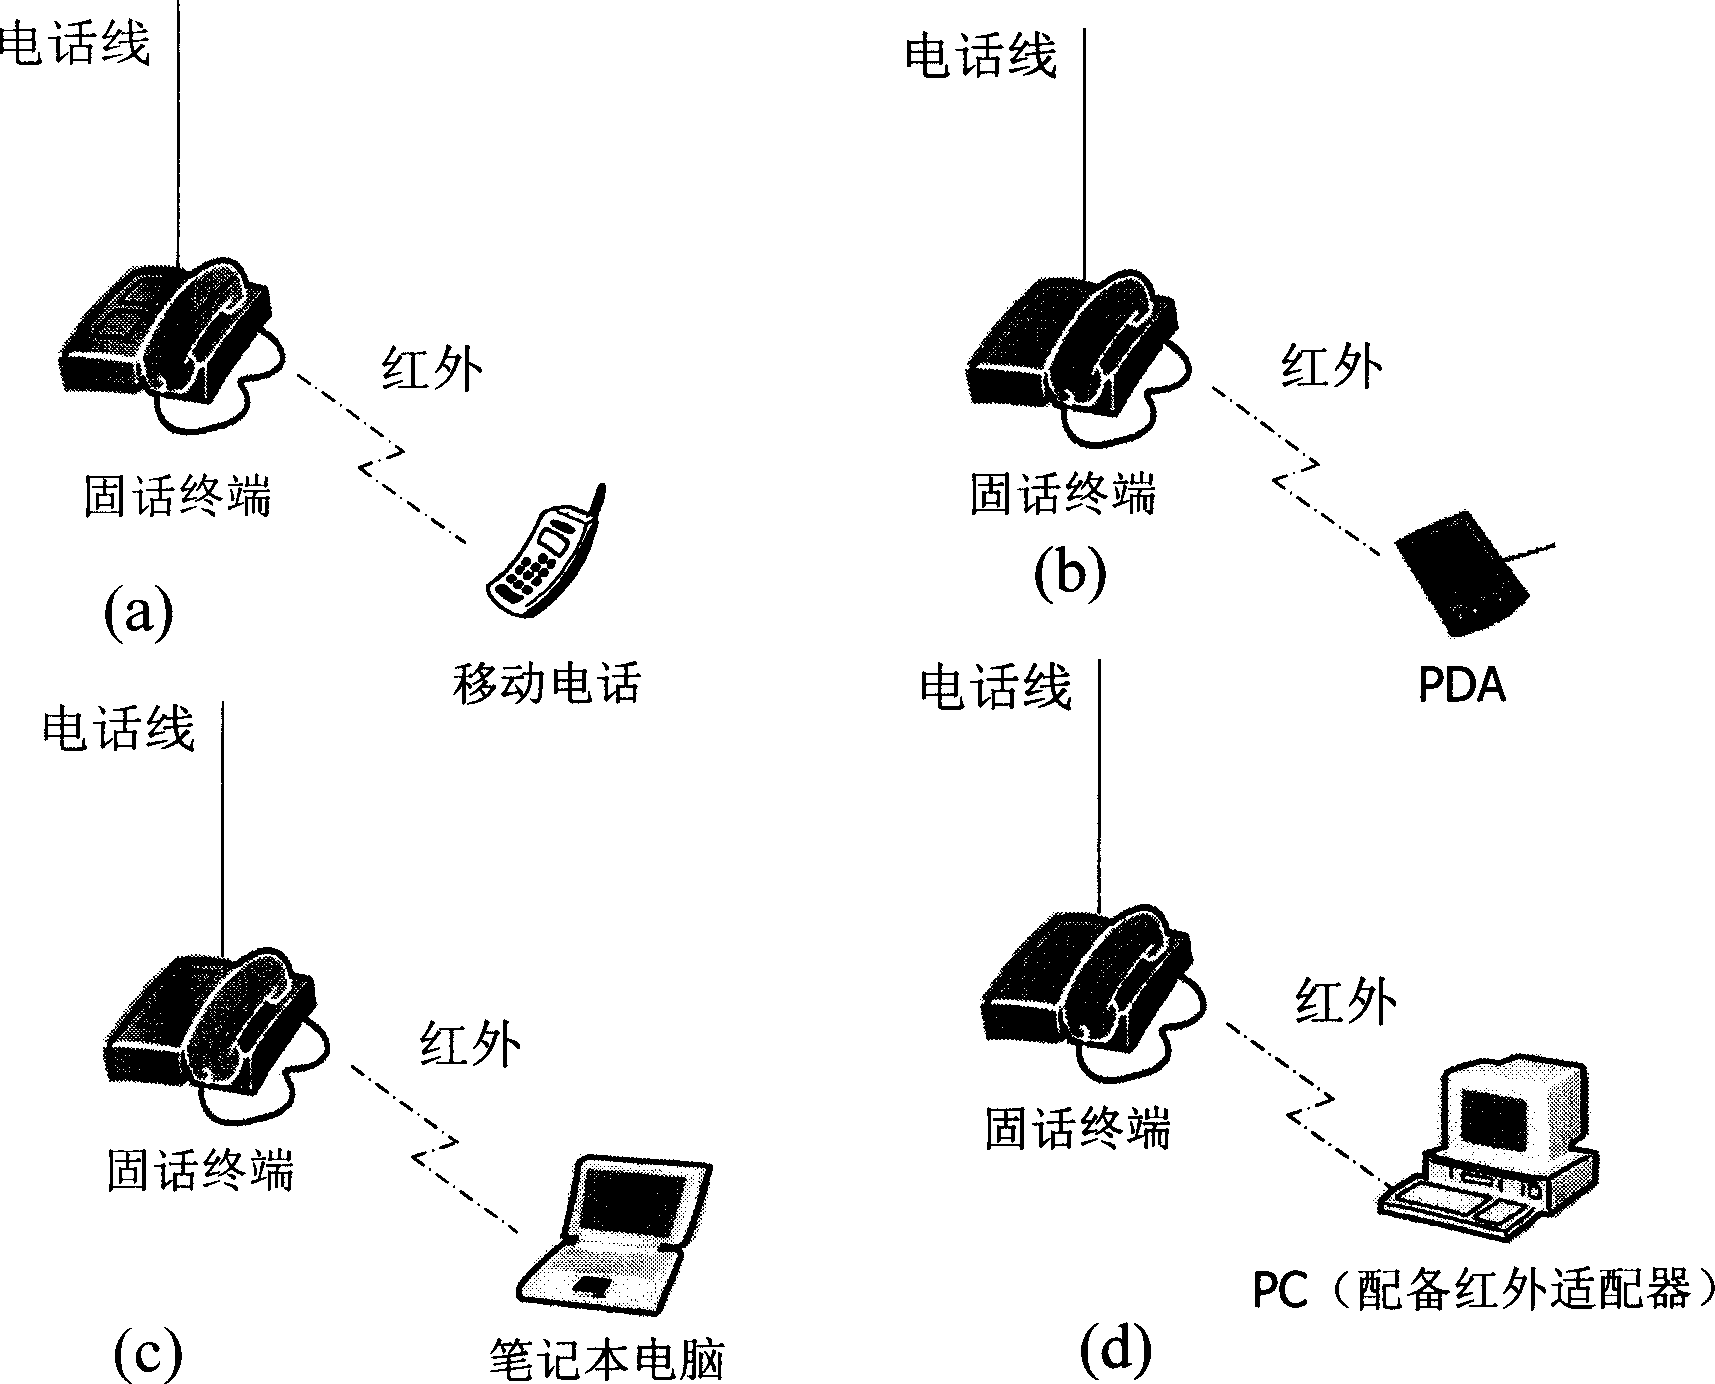 Communication method using protable terminal inatead of fixed terminal for dial-up as well as the fixed terminal